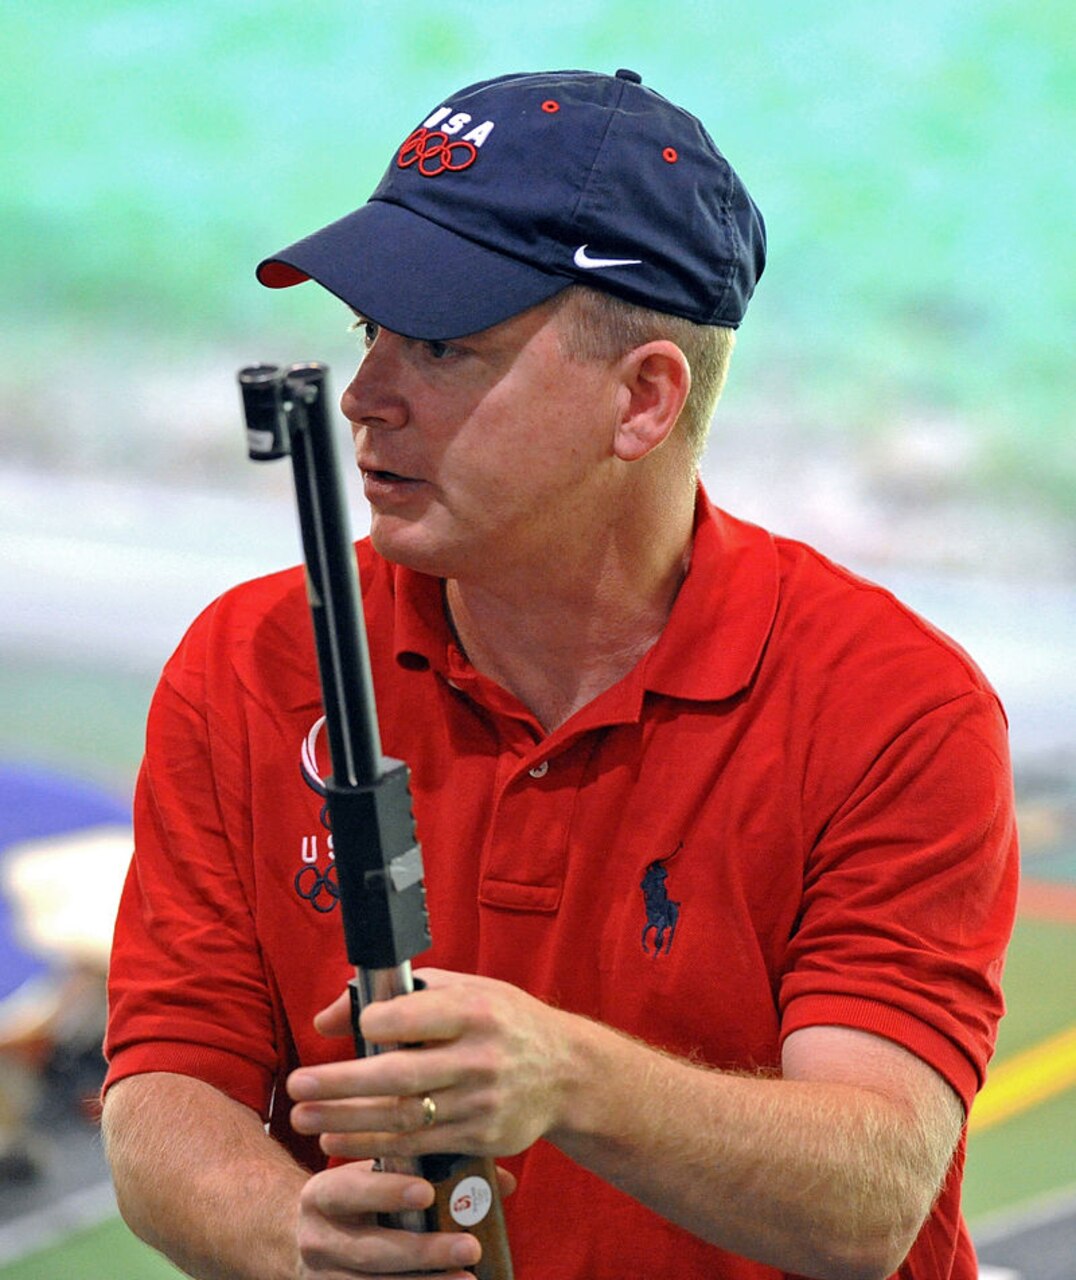 Shooter in USA Olympic hat and shirt looks downrange while holding his rifle.